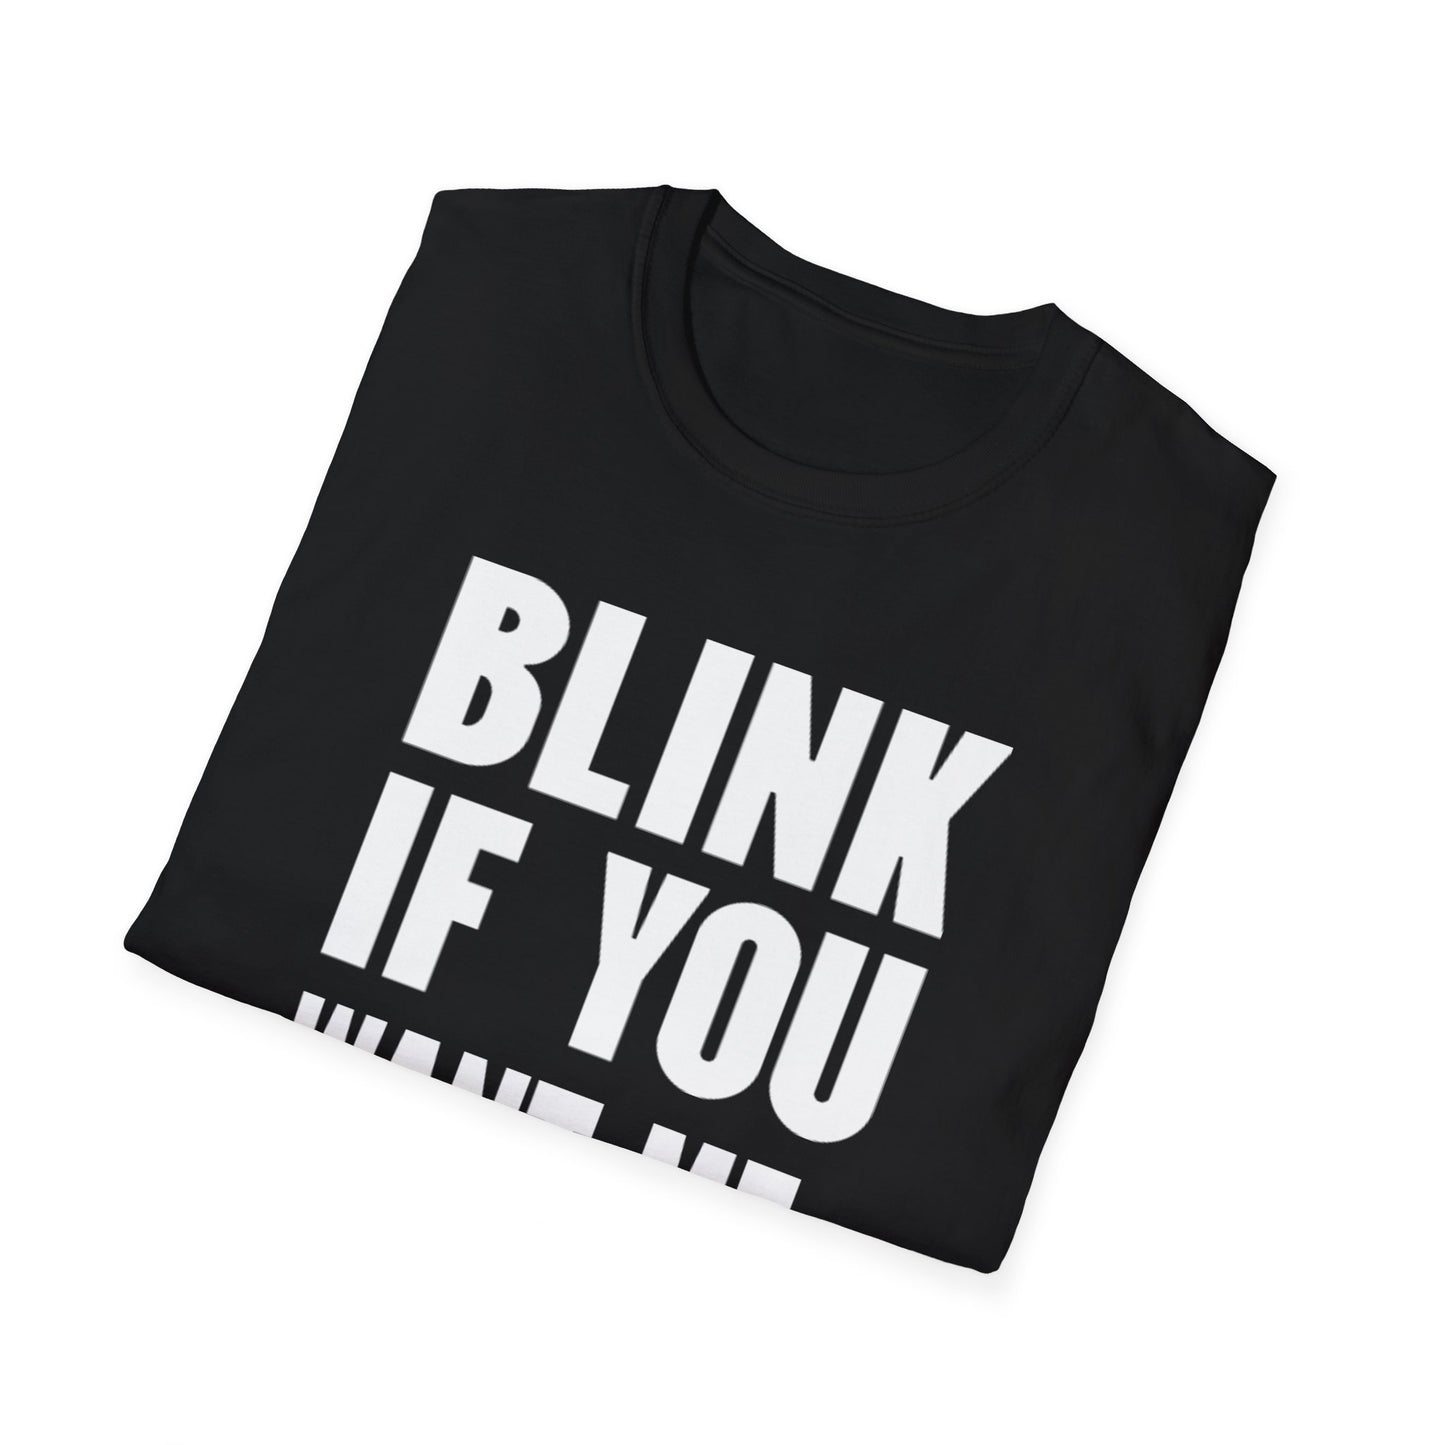 BLINK IF YOU WANT ME